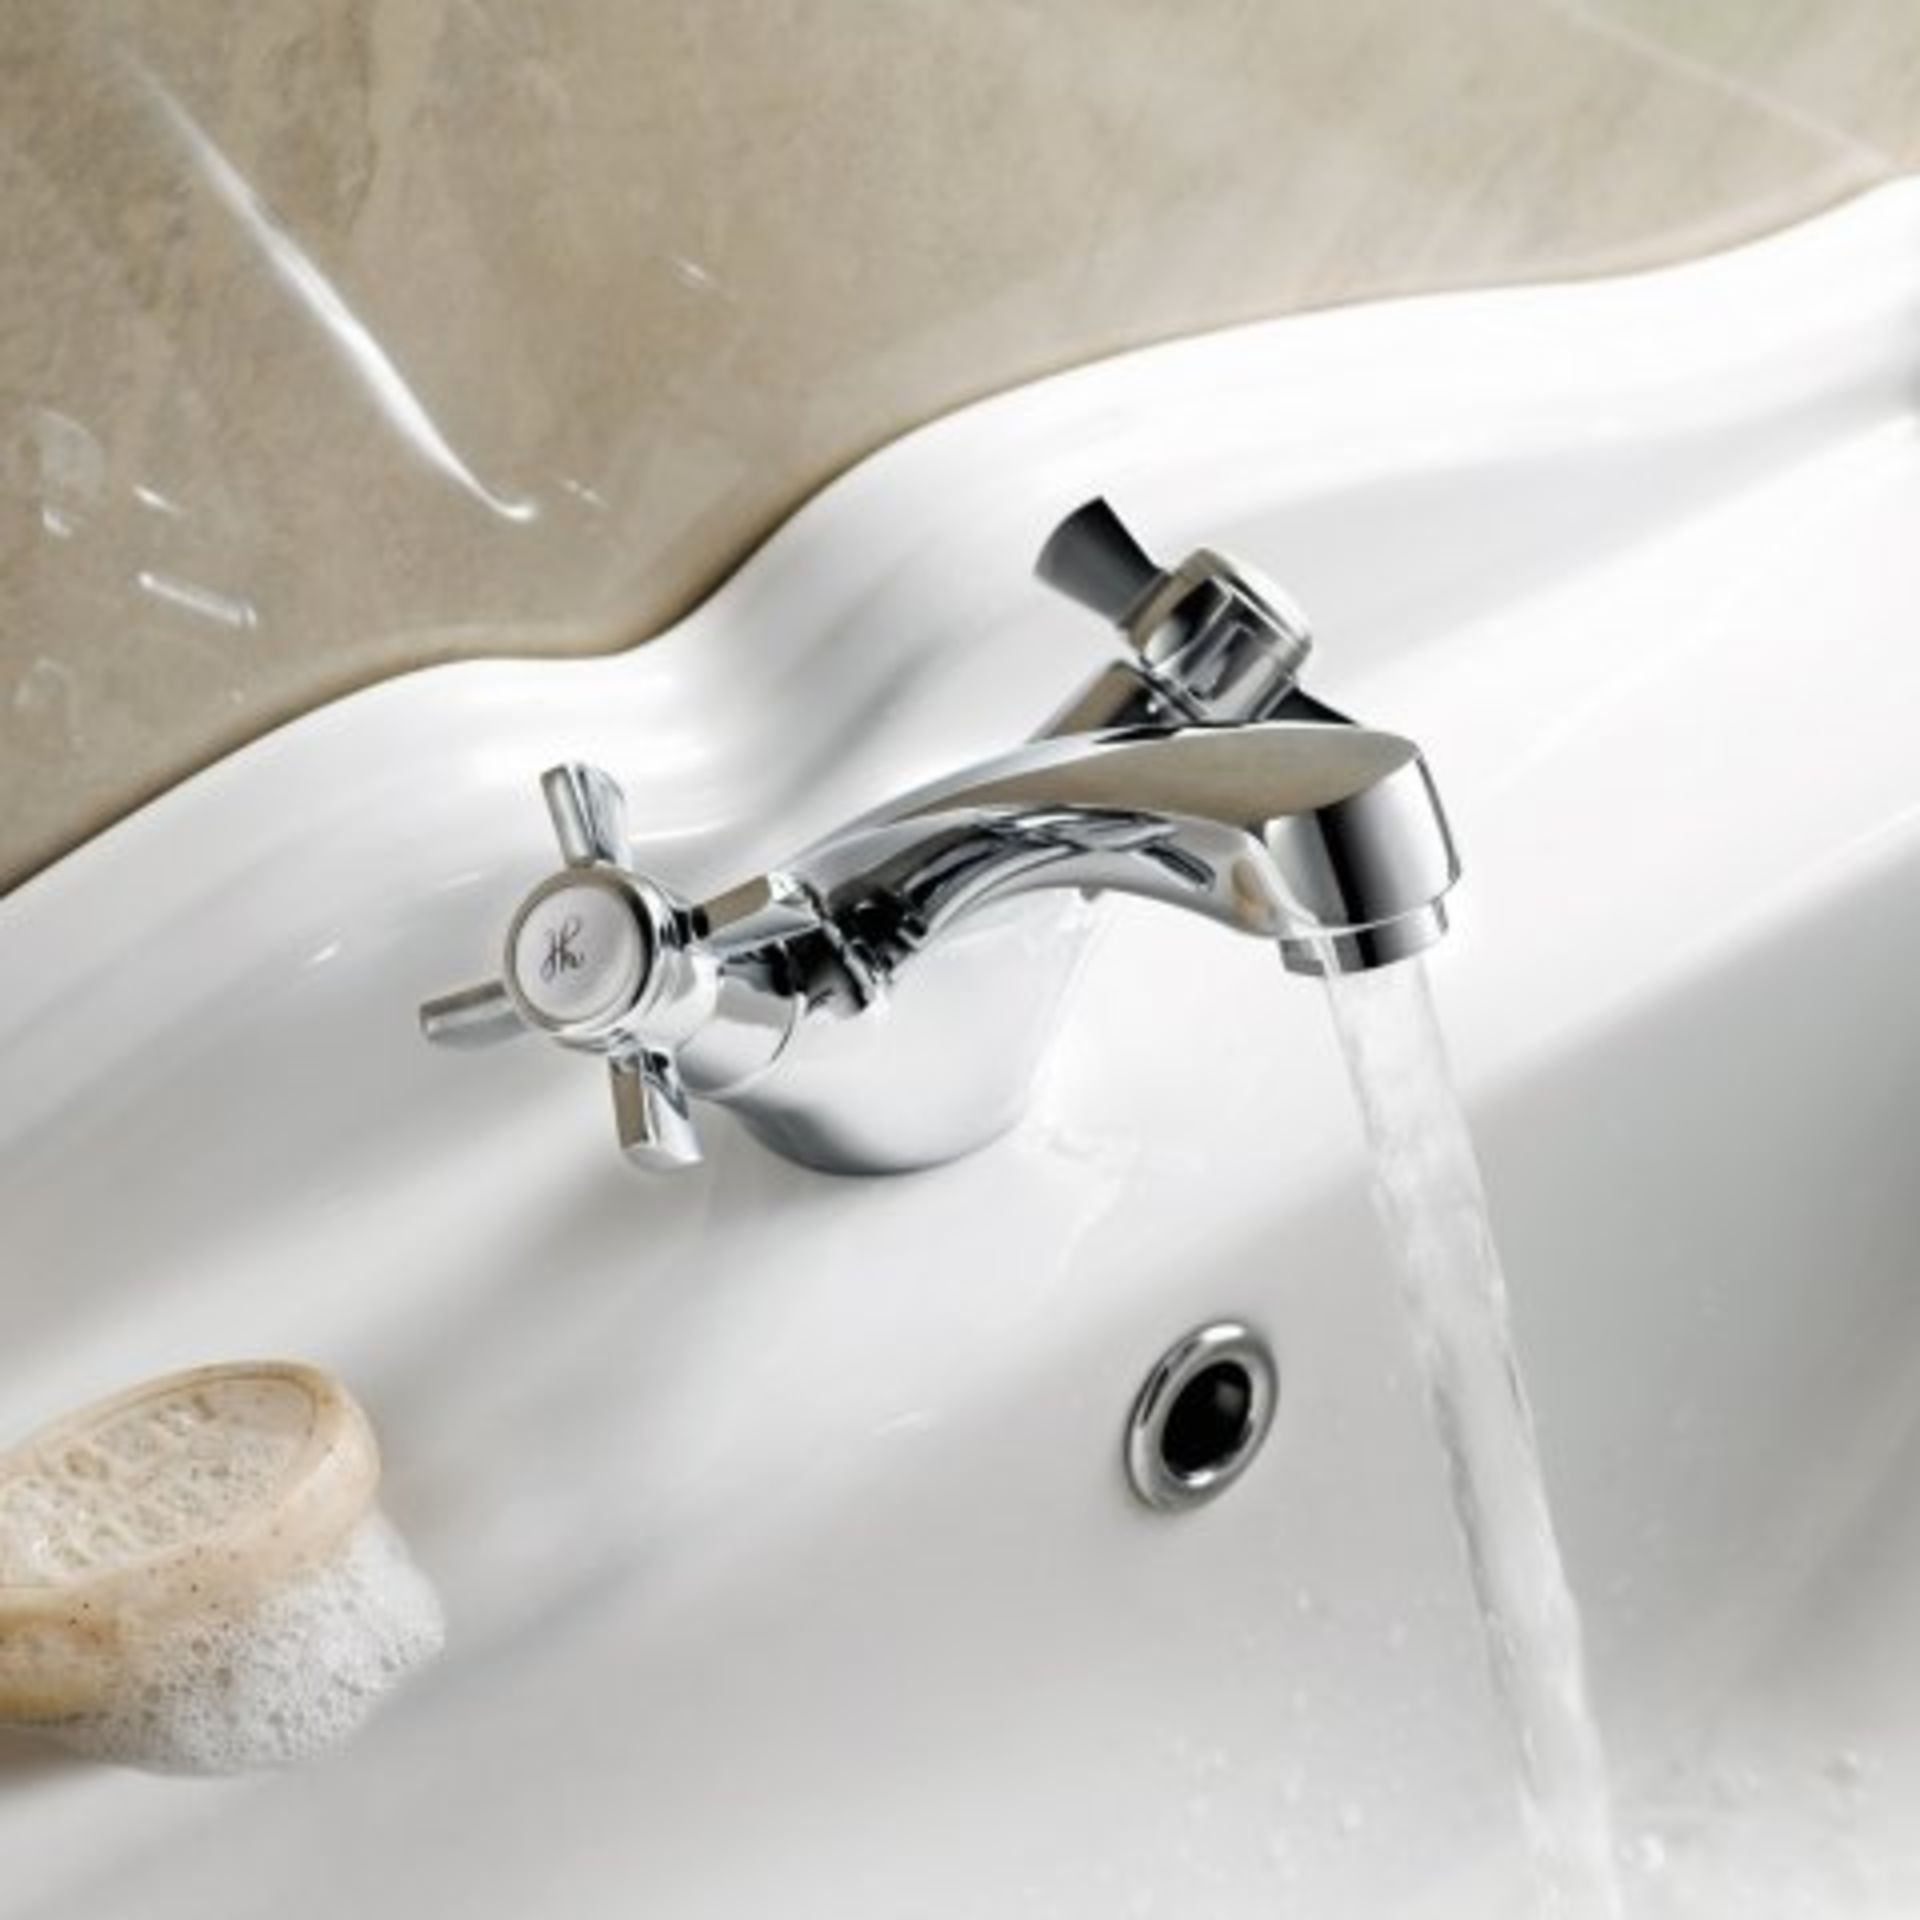 (H38) Cambridge Traditional Basin Mixer Tap Our great range of traditional taps are perfect for - Image 2 of 3